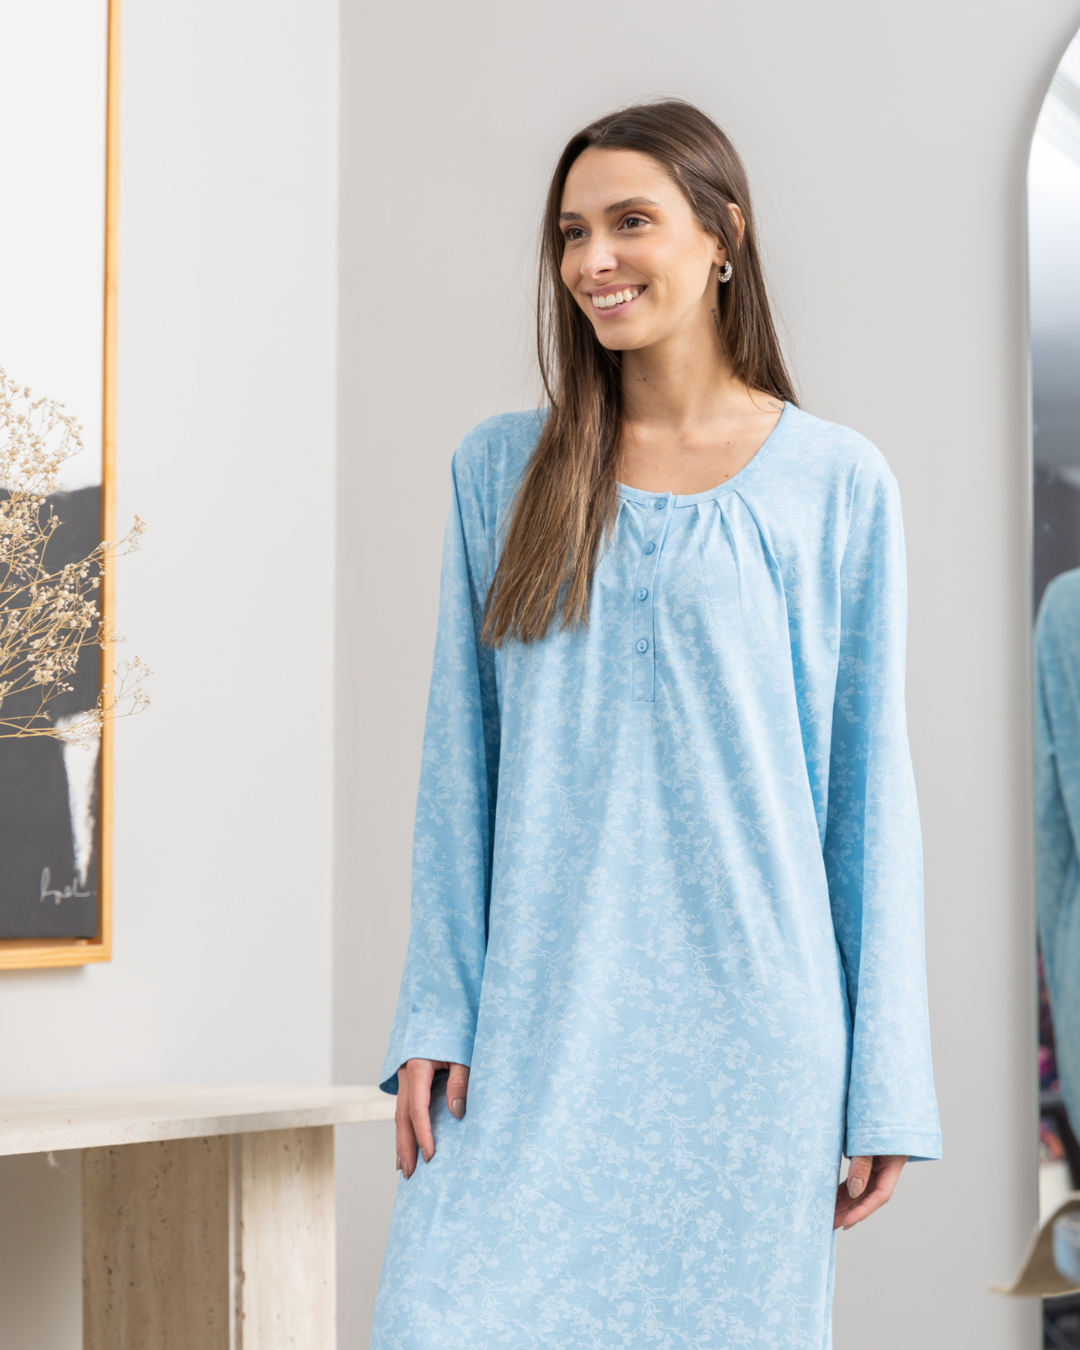 Women's long-sleeved rhubarb nightshirt with butterflies print buttons